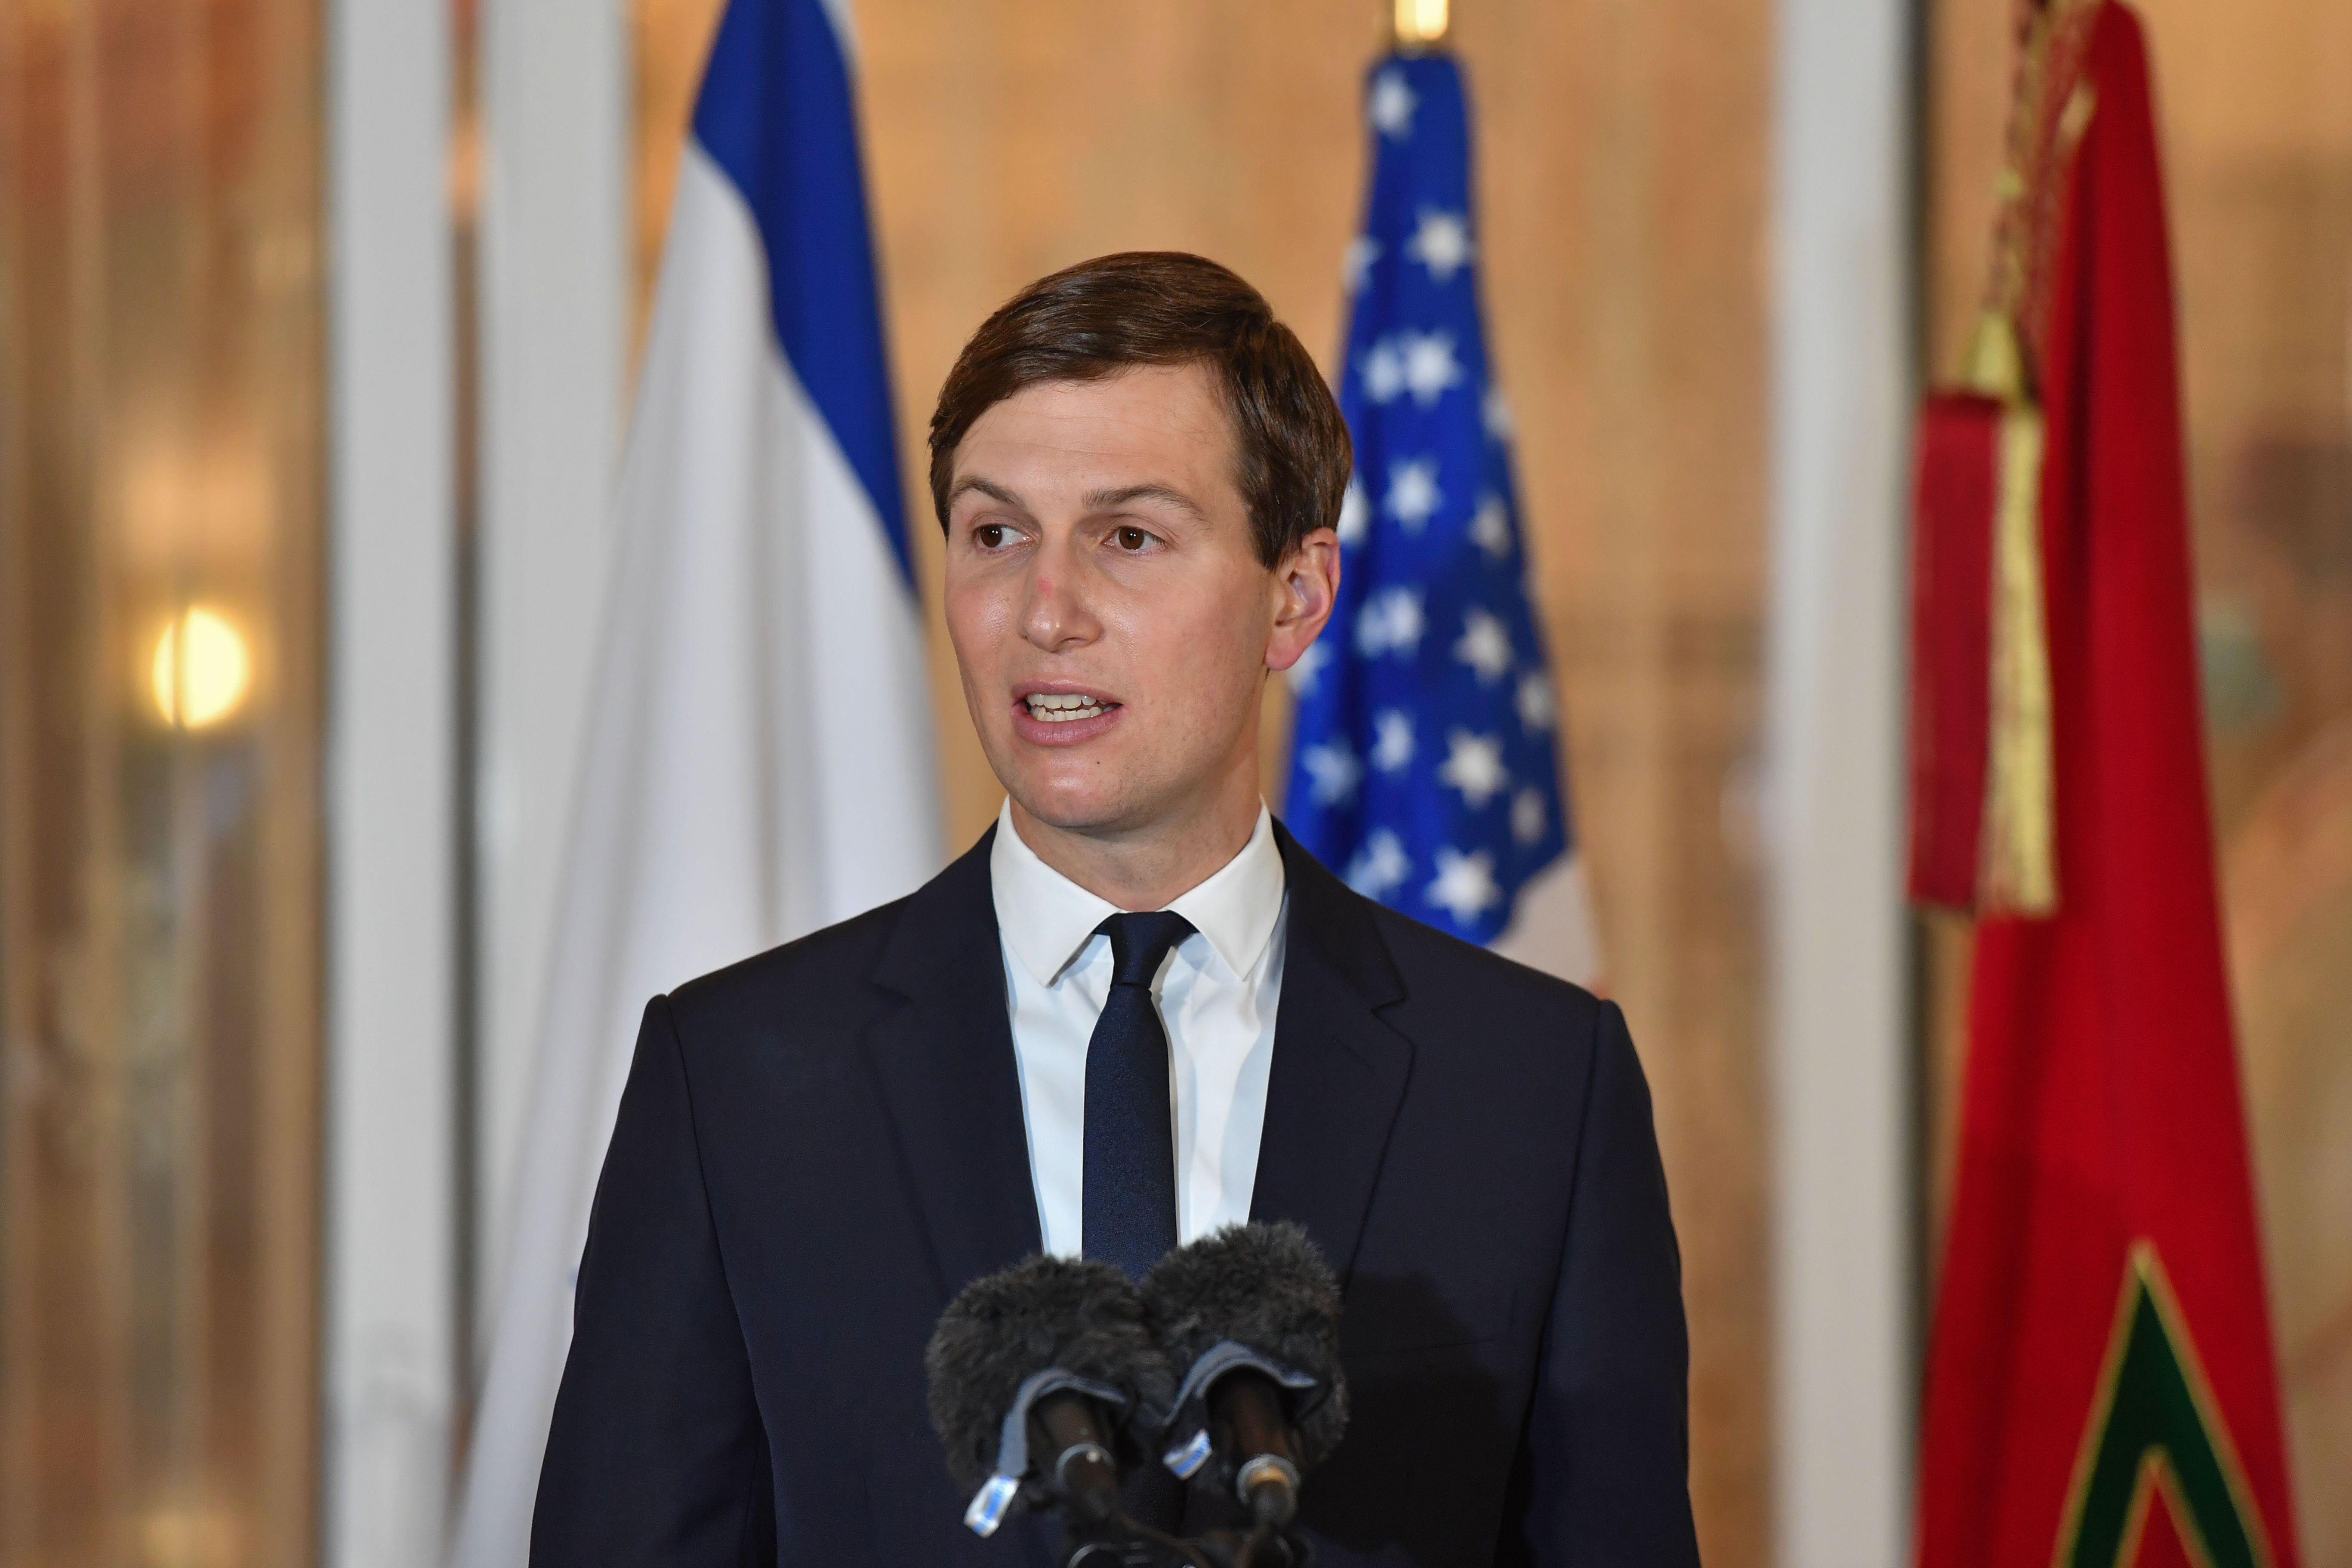 Jared Kushner Socked Taxpayers With $24,000 Hotel Bill Weeks Before He Left White House